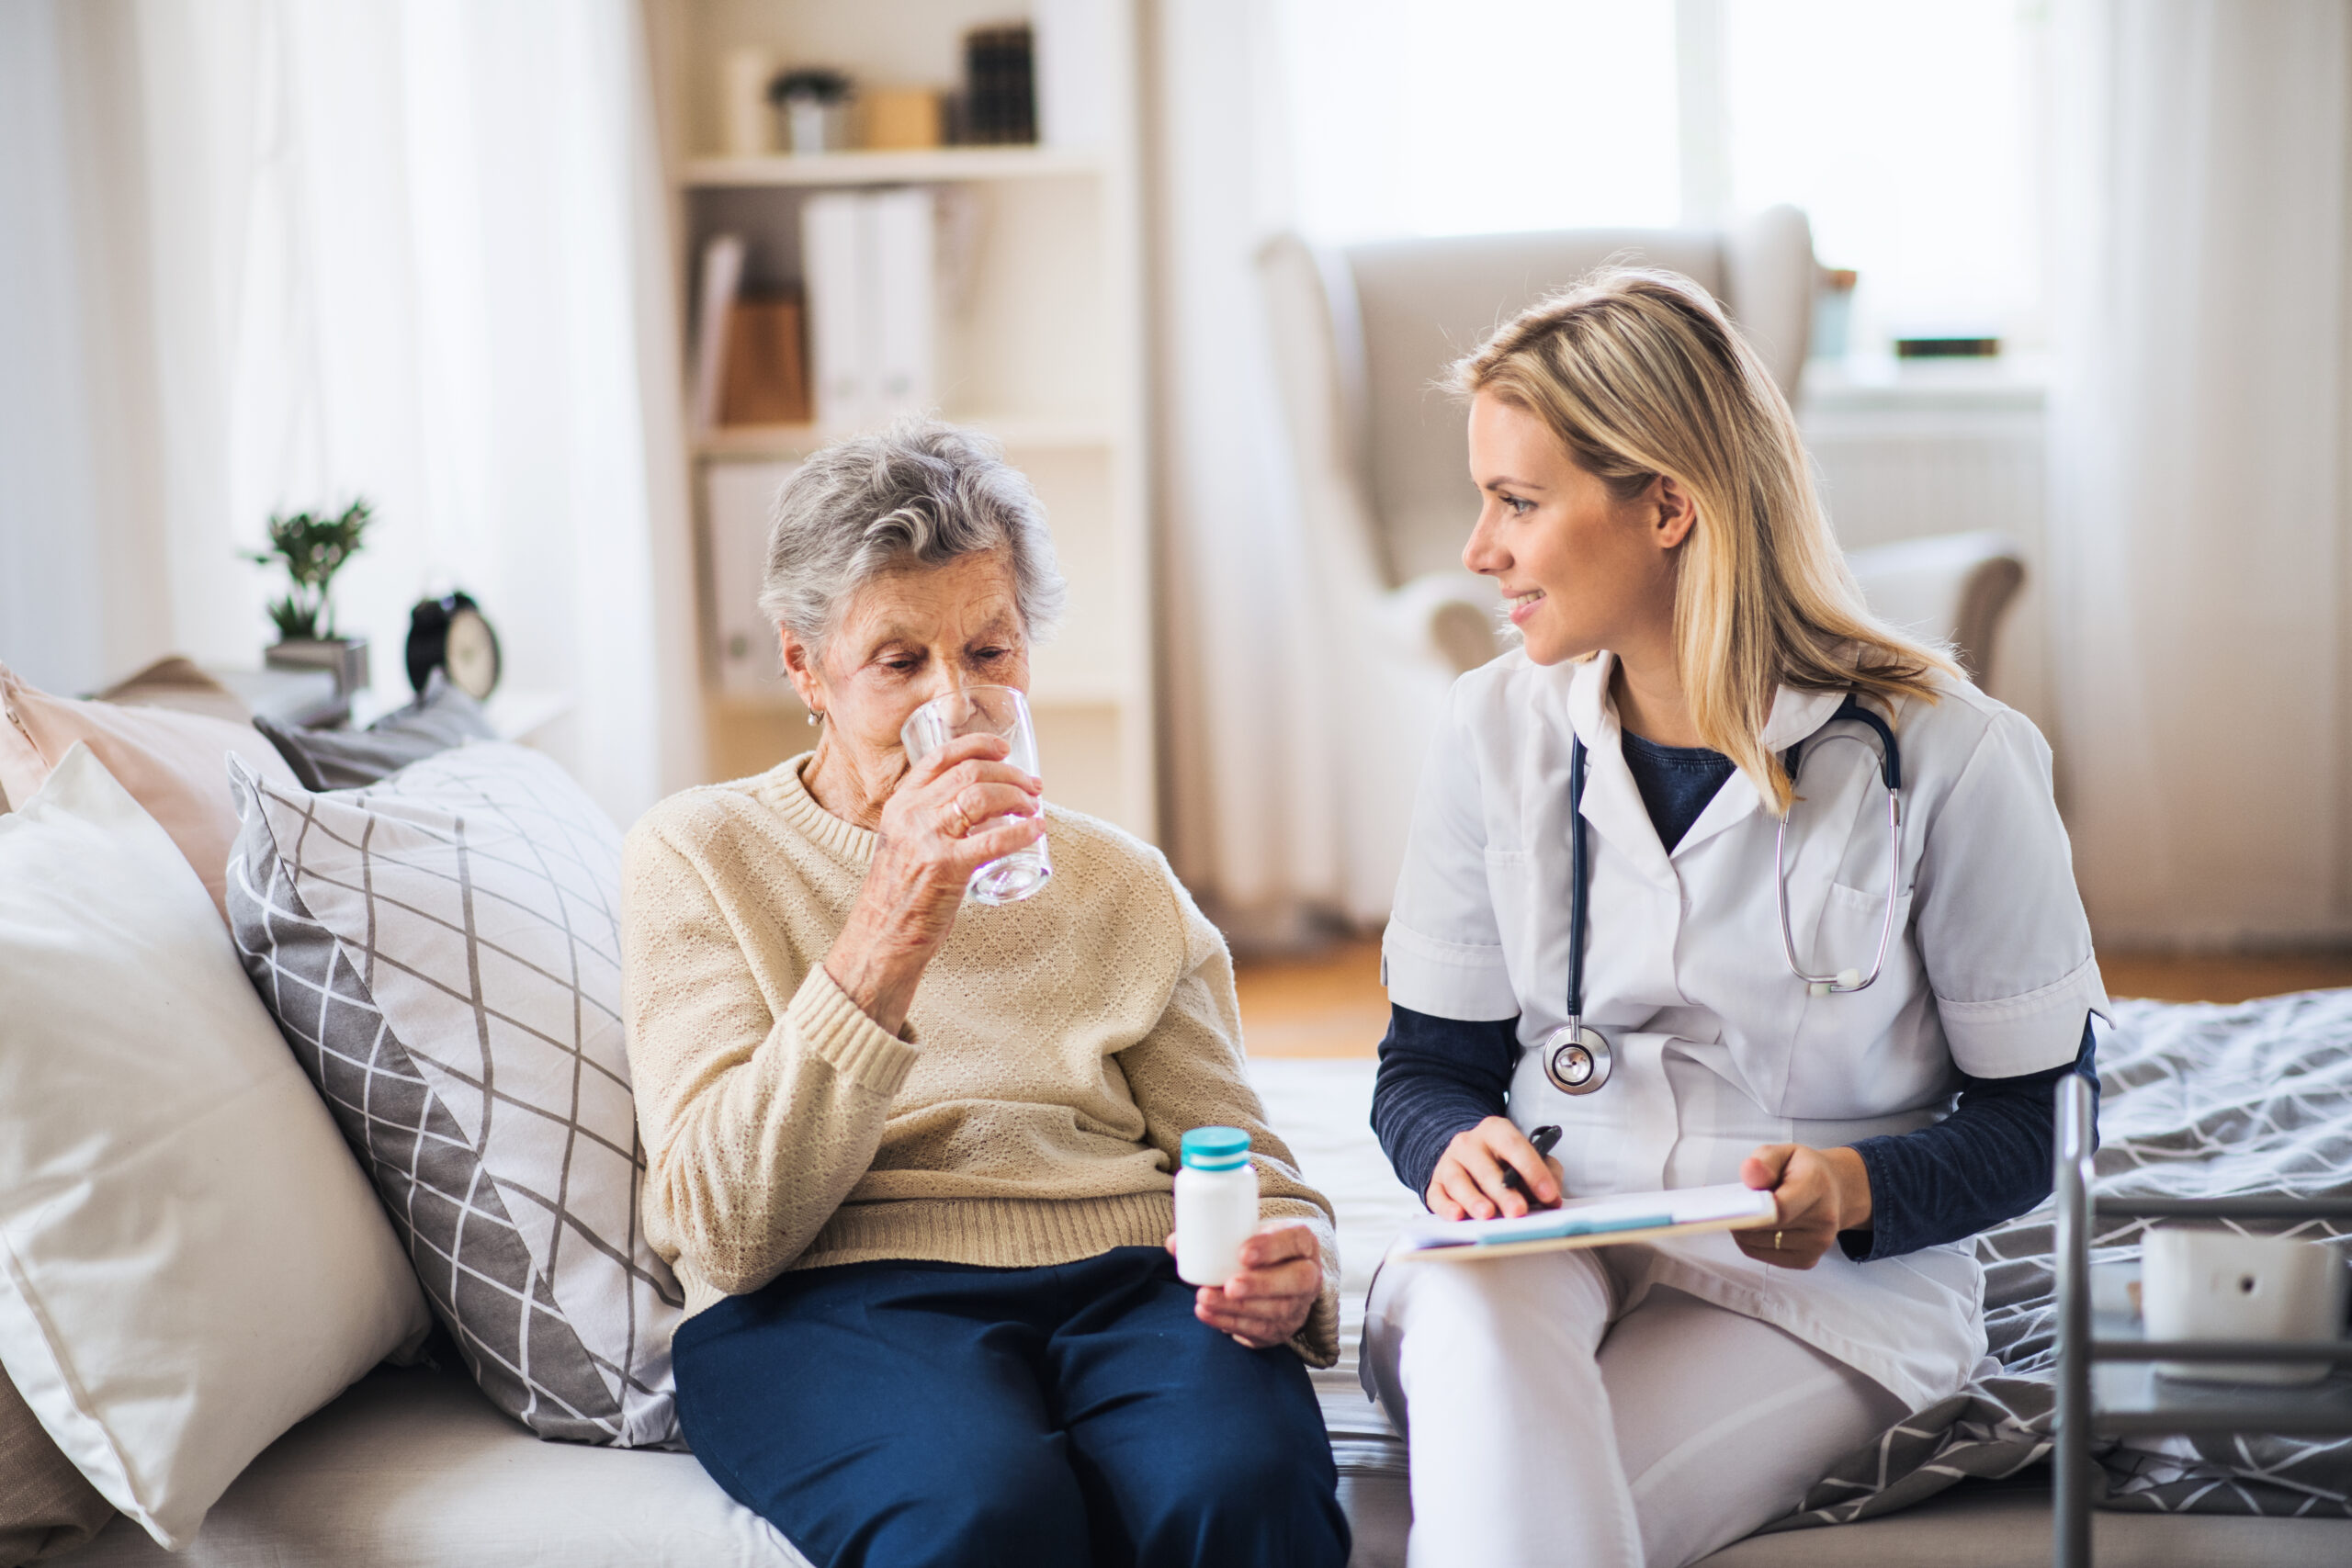 What Home Health Aides Are Not Allowed to Do?